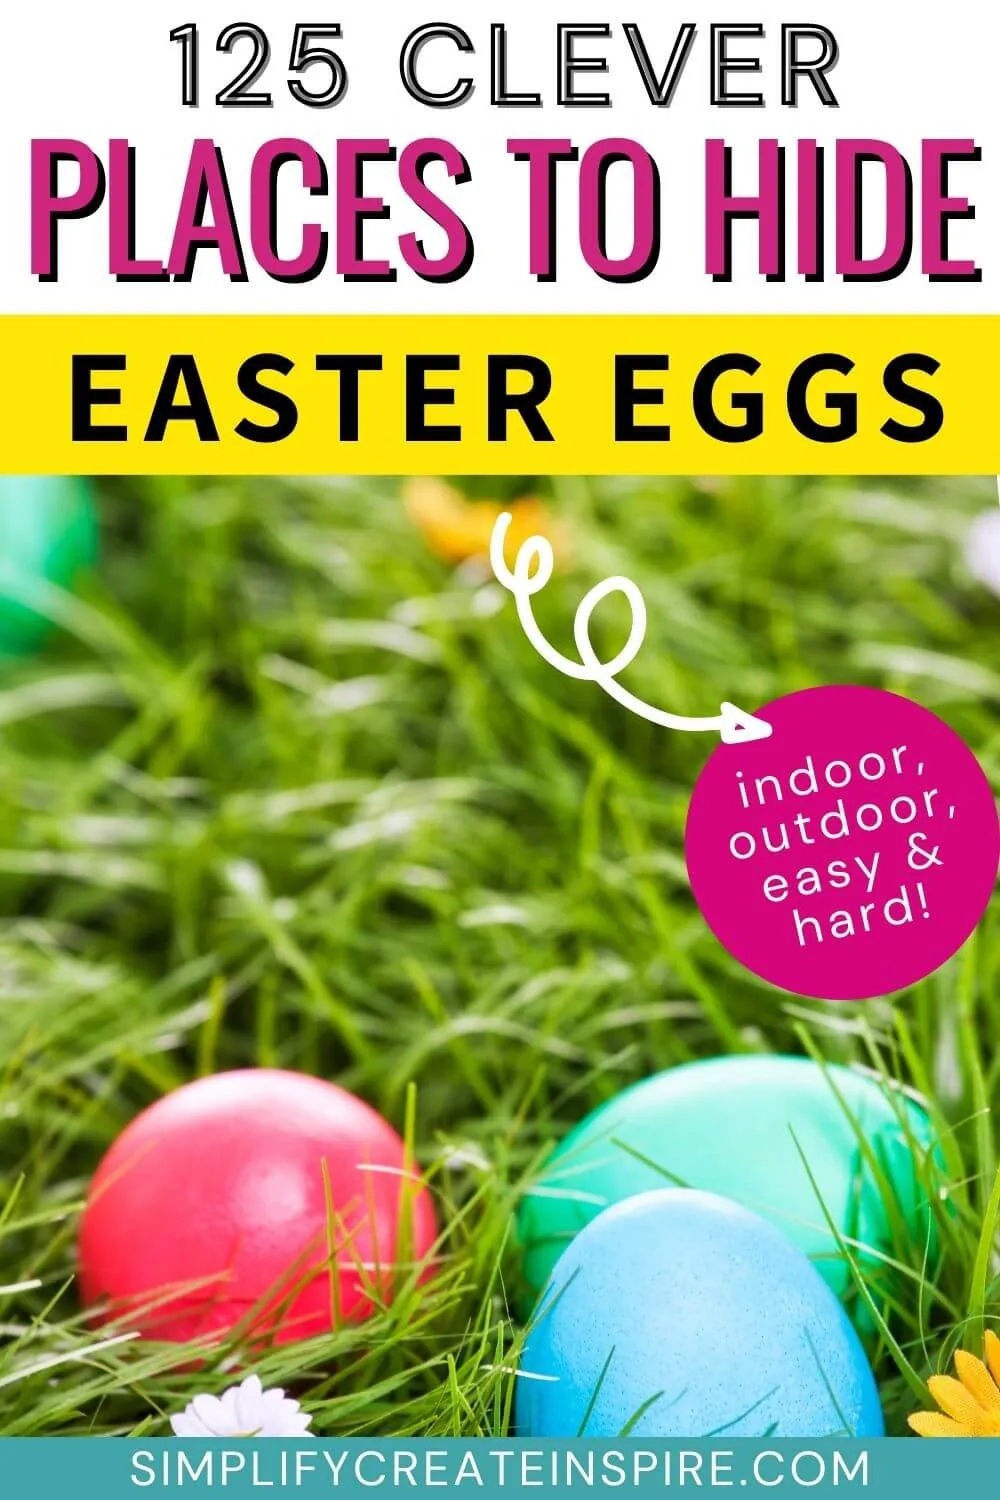 Pinterest image - Text reads best places to hide easter eggs